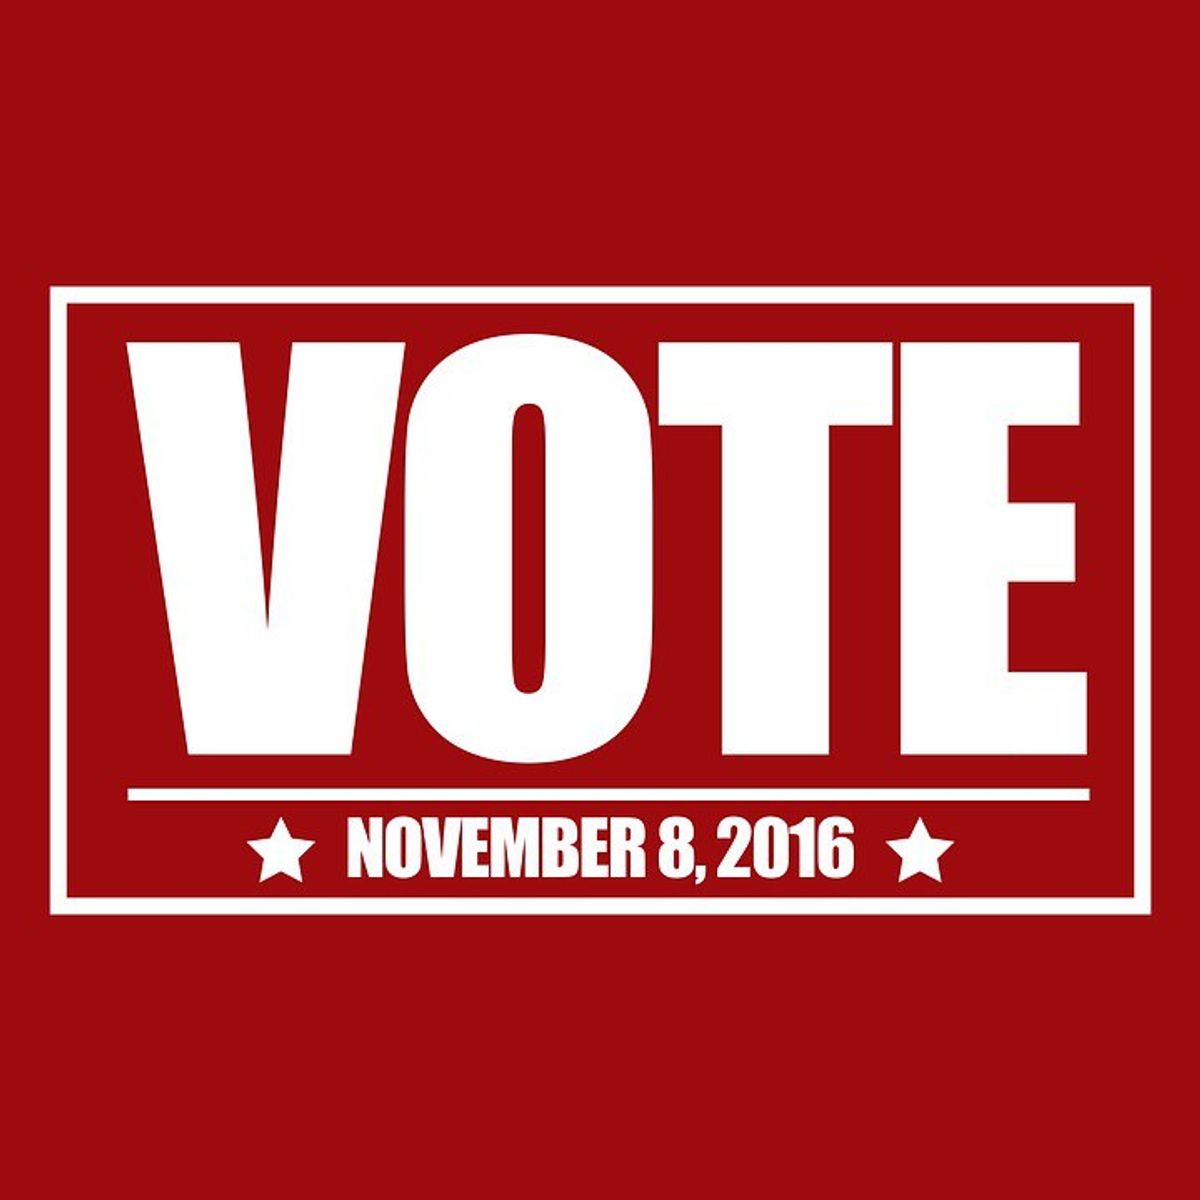 The 2016 Presidential Election: Go Vote